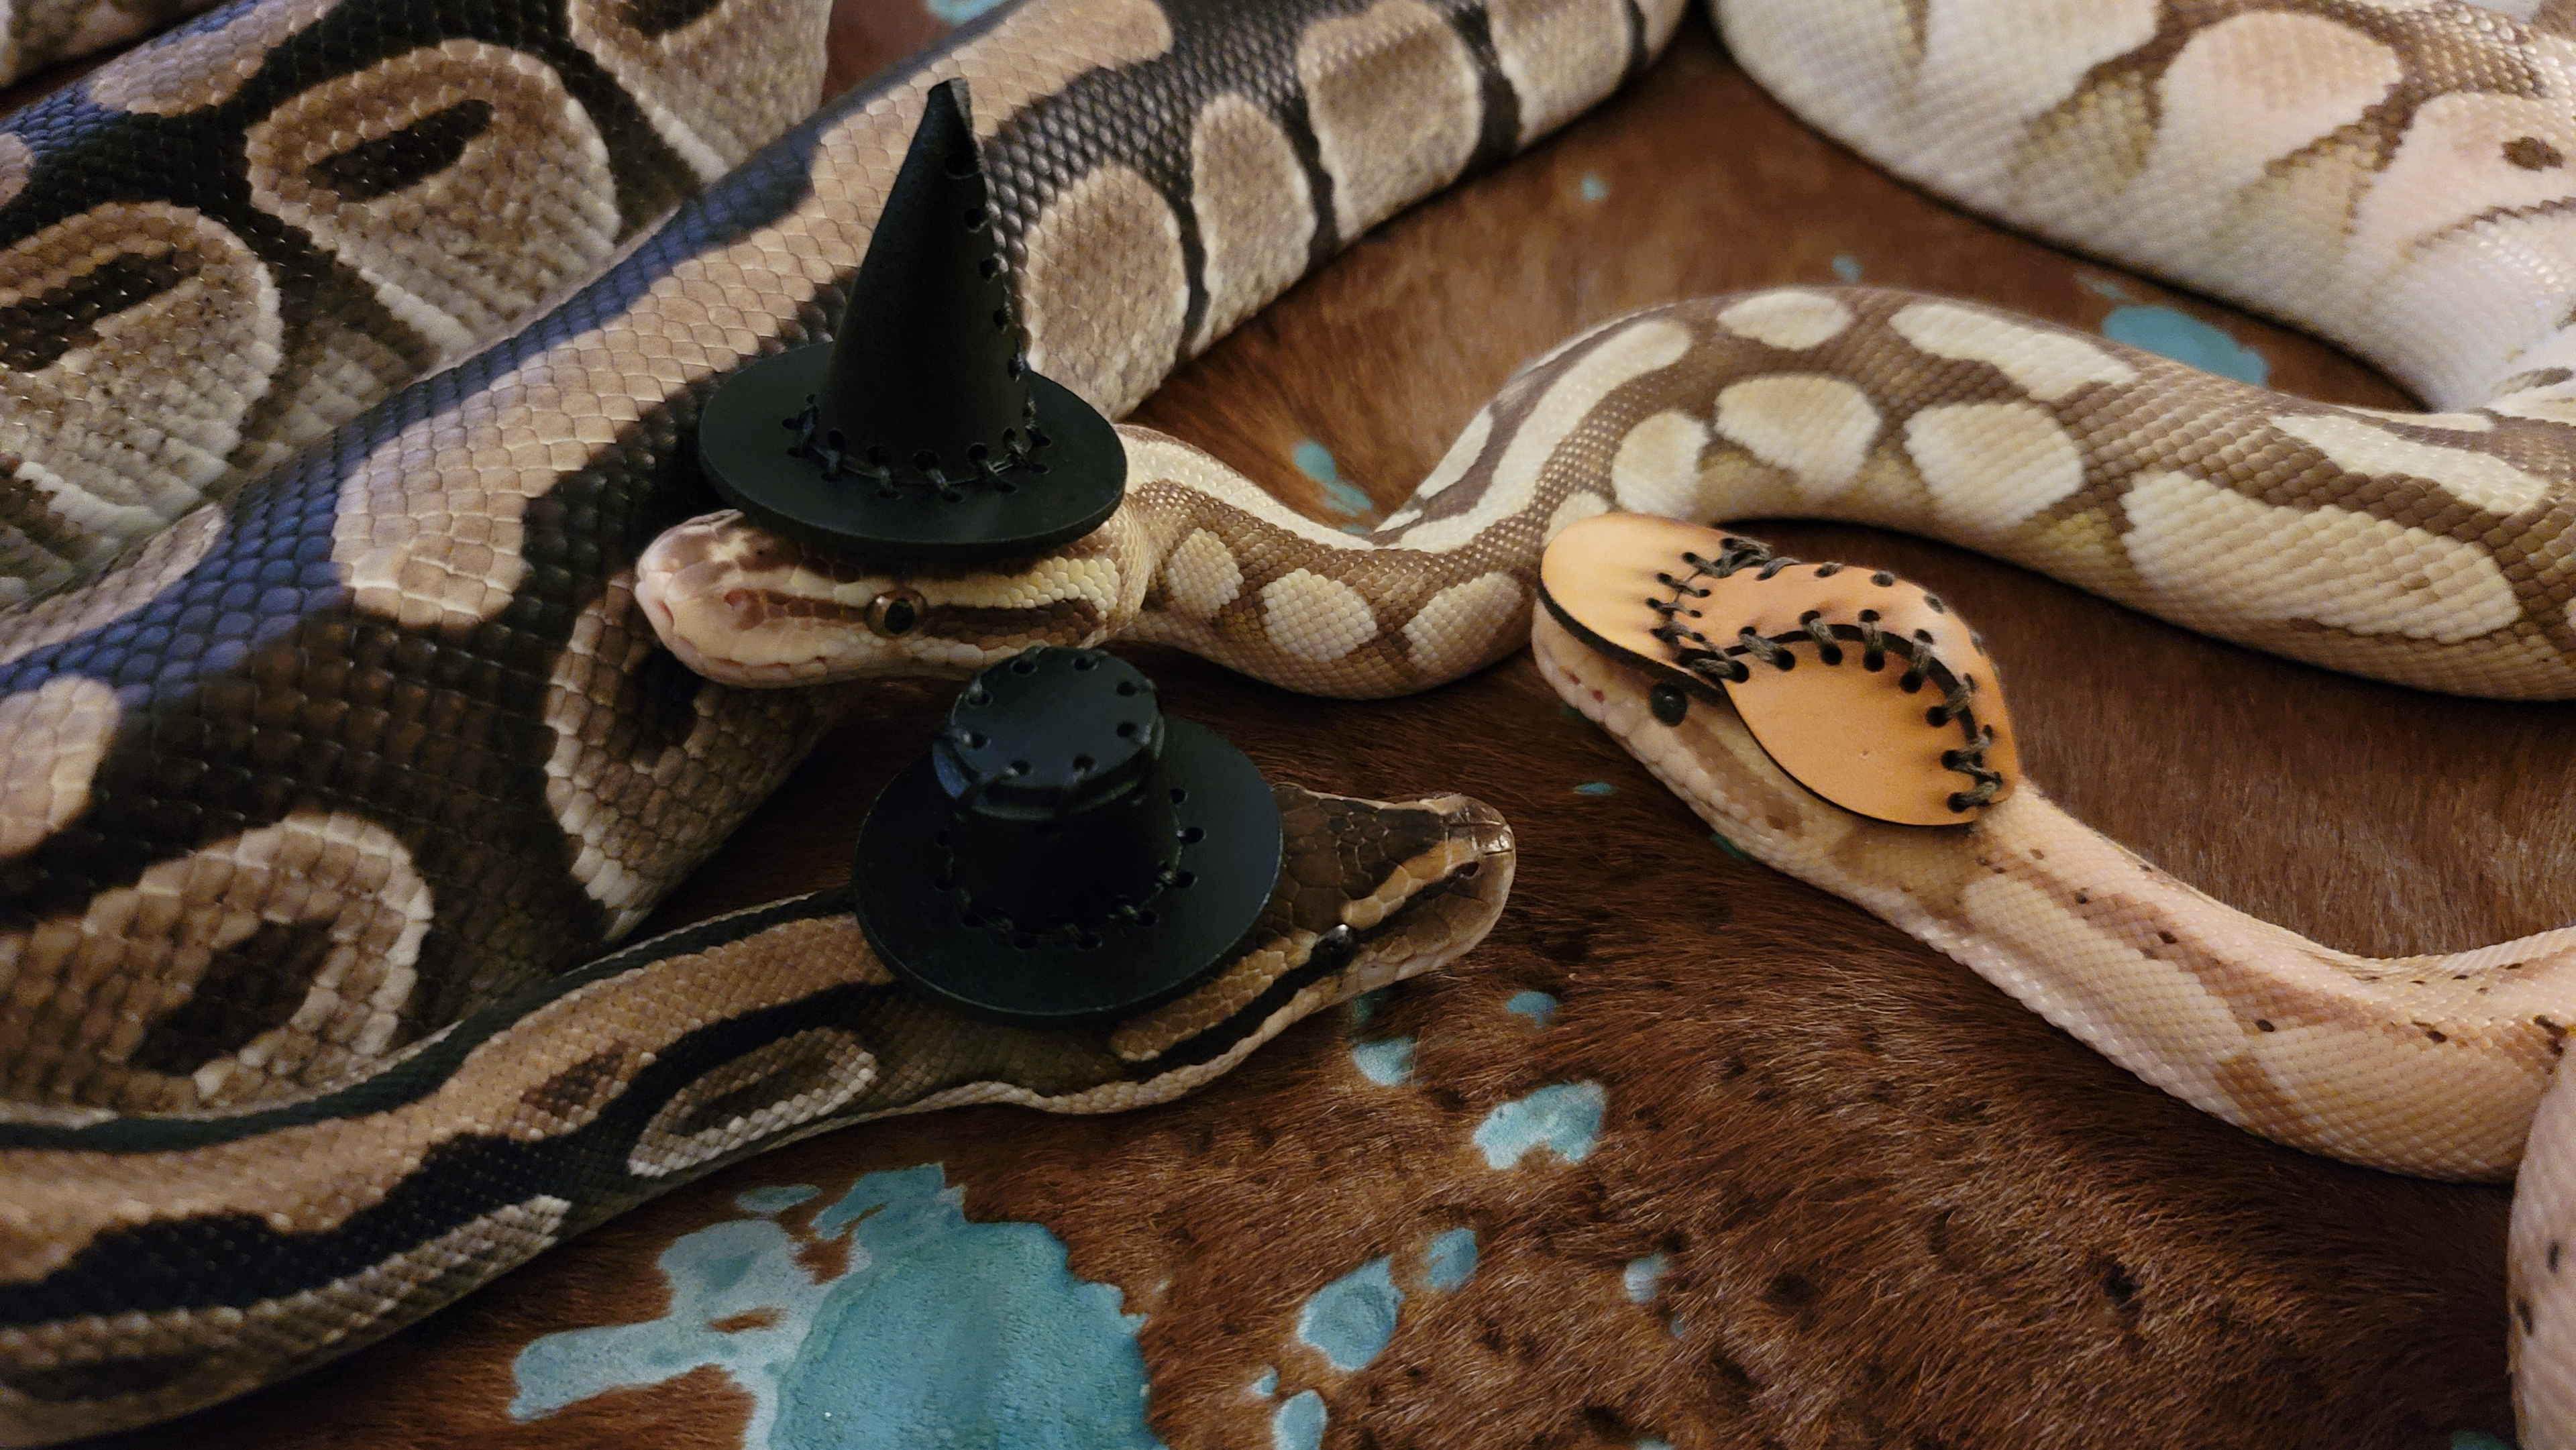 Snakelets and Reptile Accessories